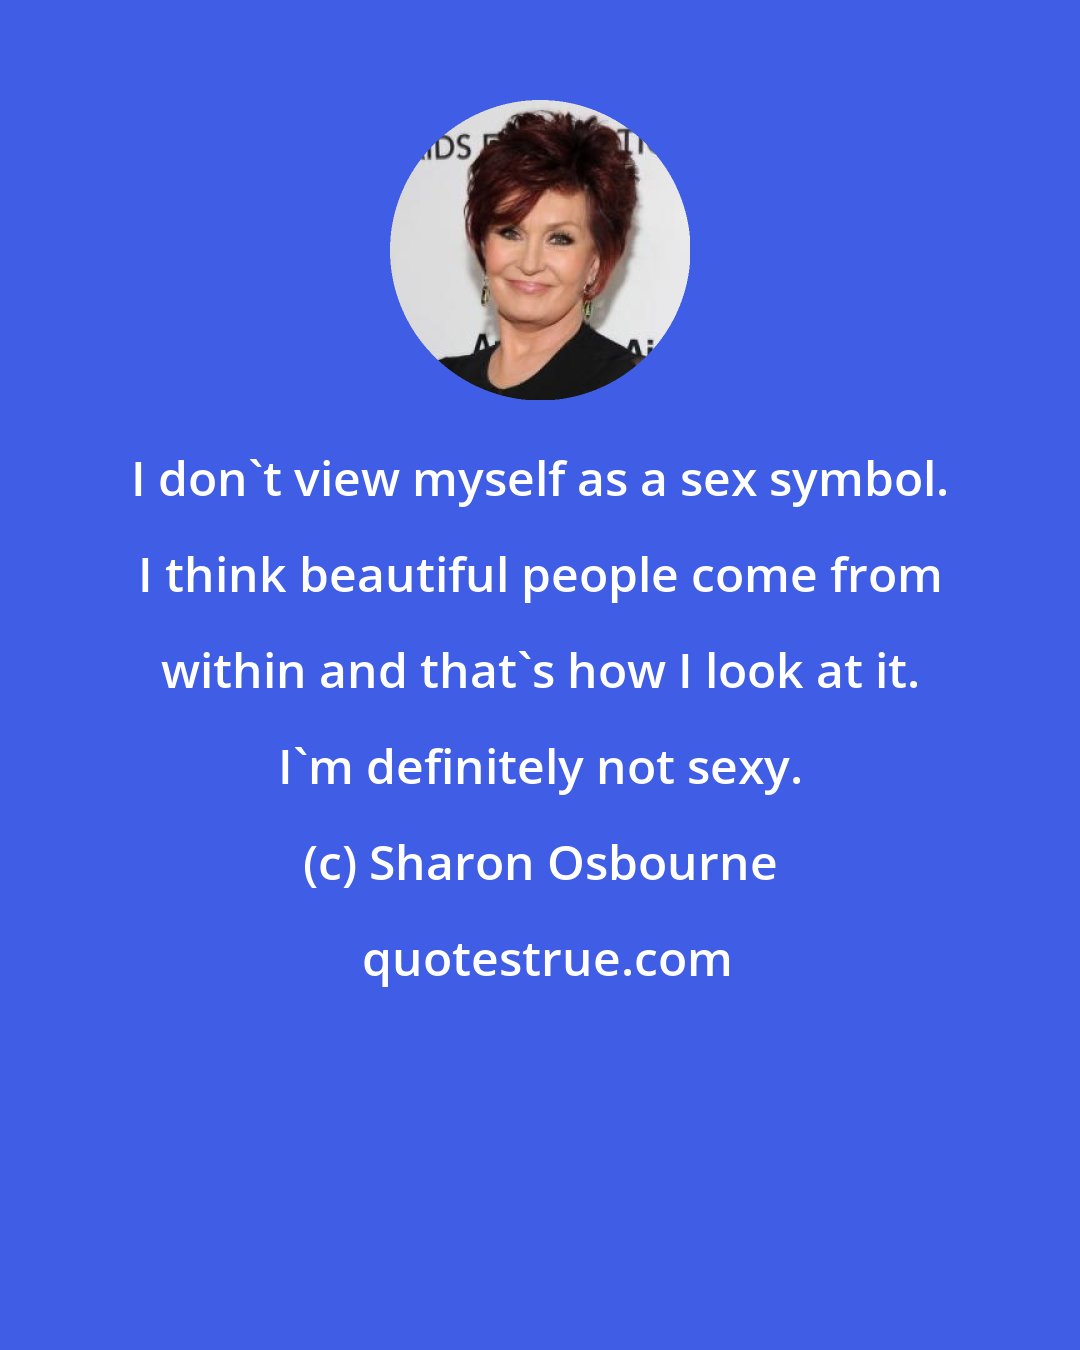 Sharon Osbourne: I don't view myself as a sex symbol. I think beautiful people come from within and that's how I look at it. I'm definitely not sexy.